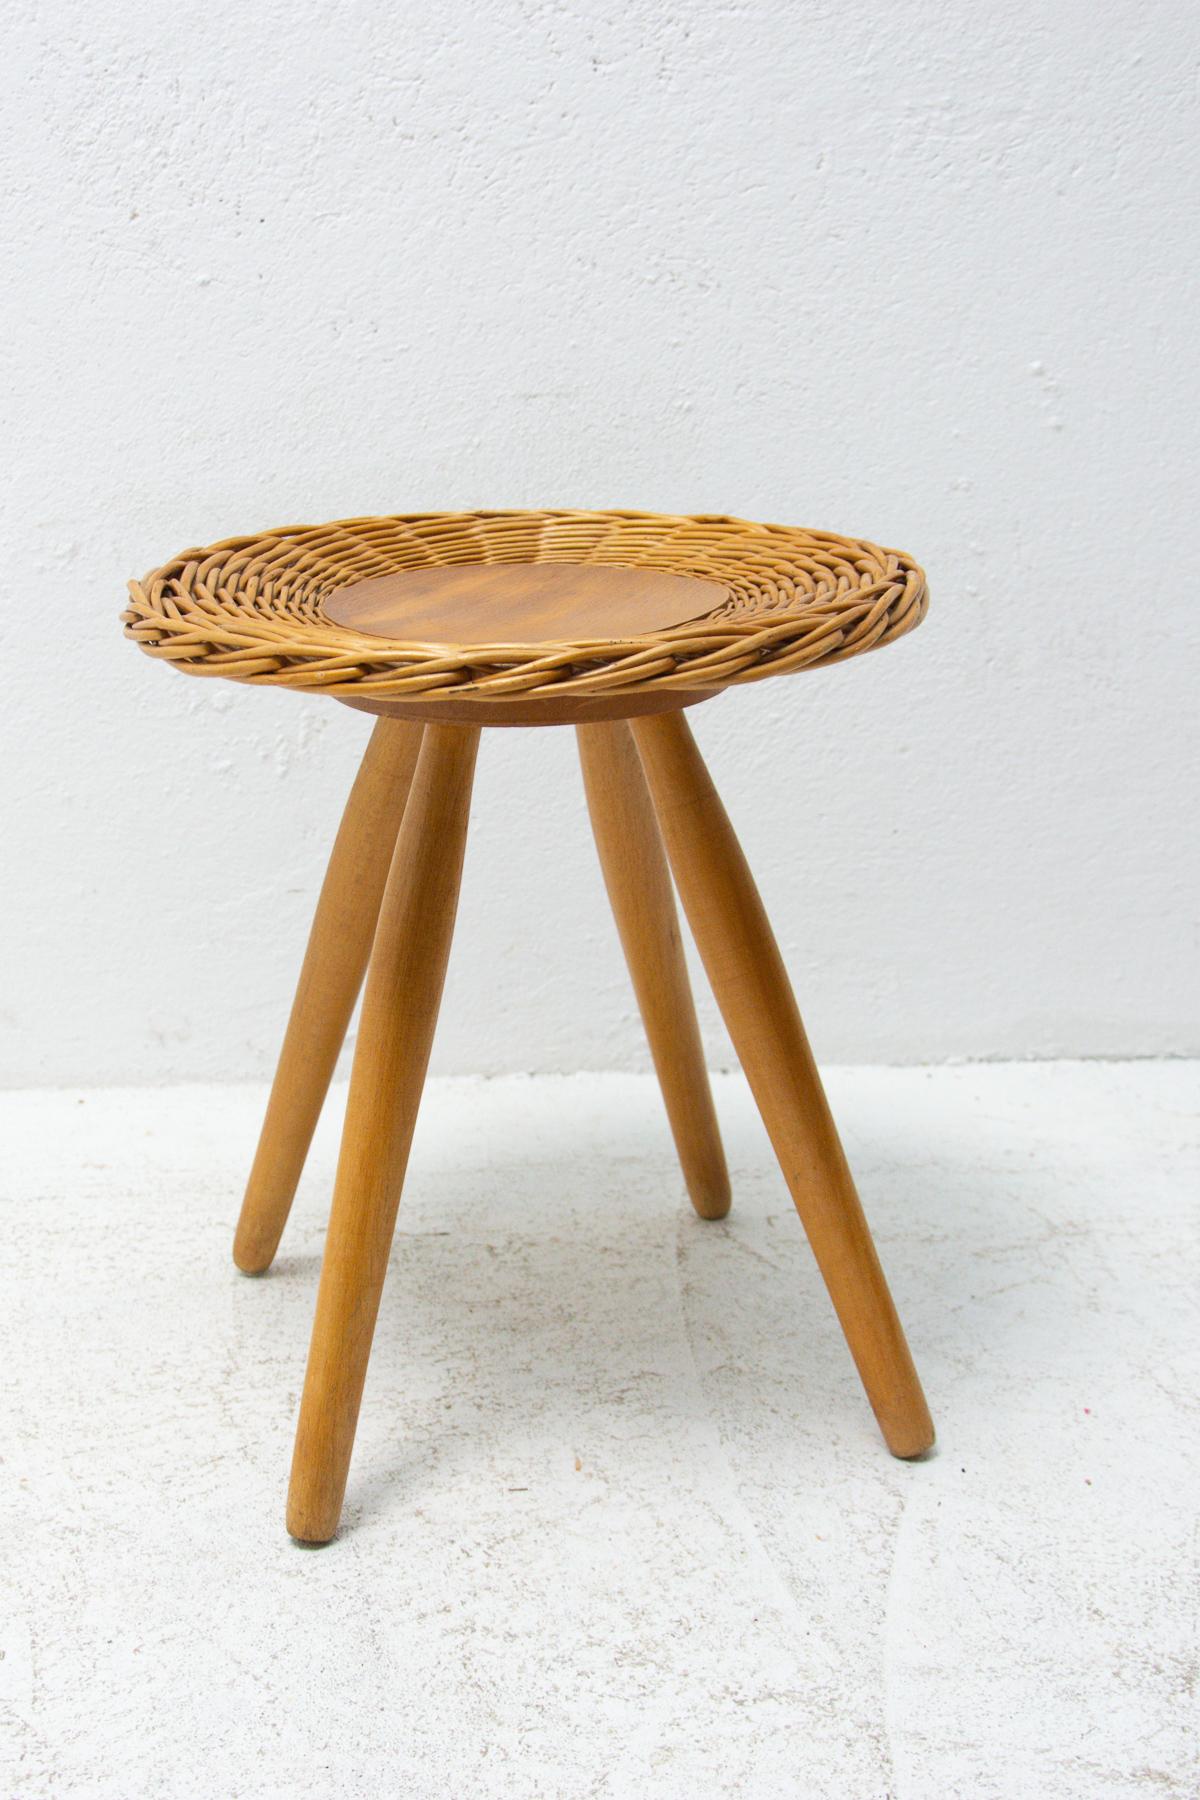 Czechoslovak rattan stool designed by Jan Kalous for ÚLUV in the 1960´s. Very simple and elegant design. In good Vintage condition, bears signs of age and using.